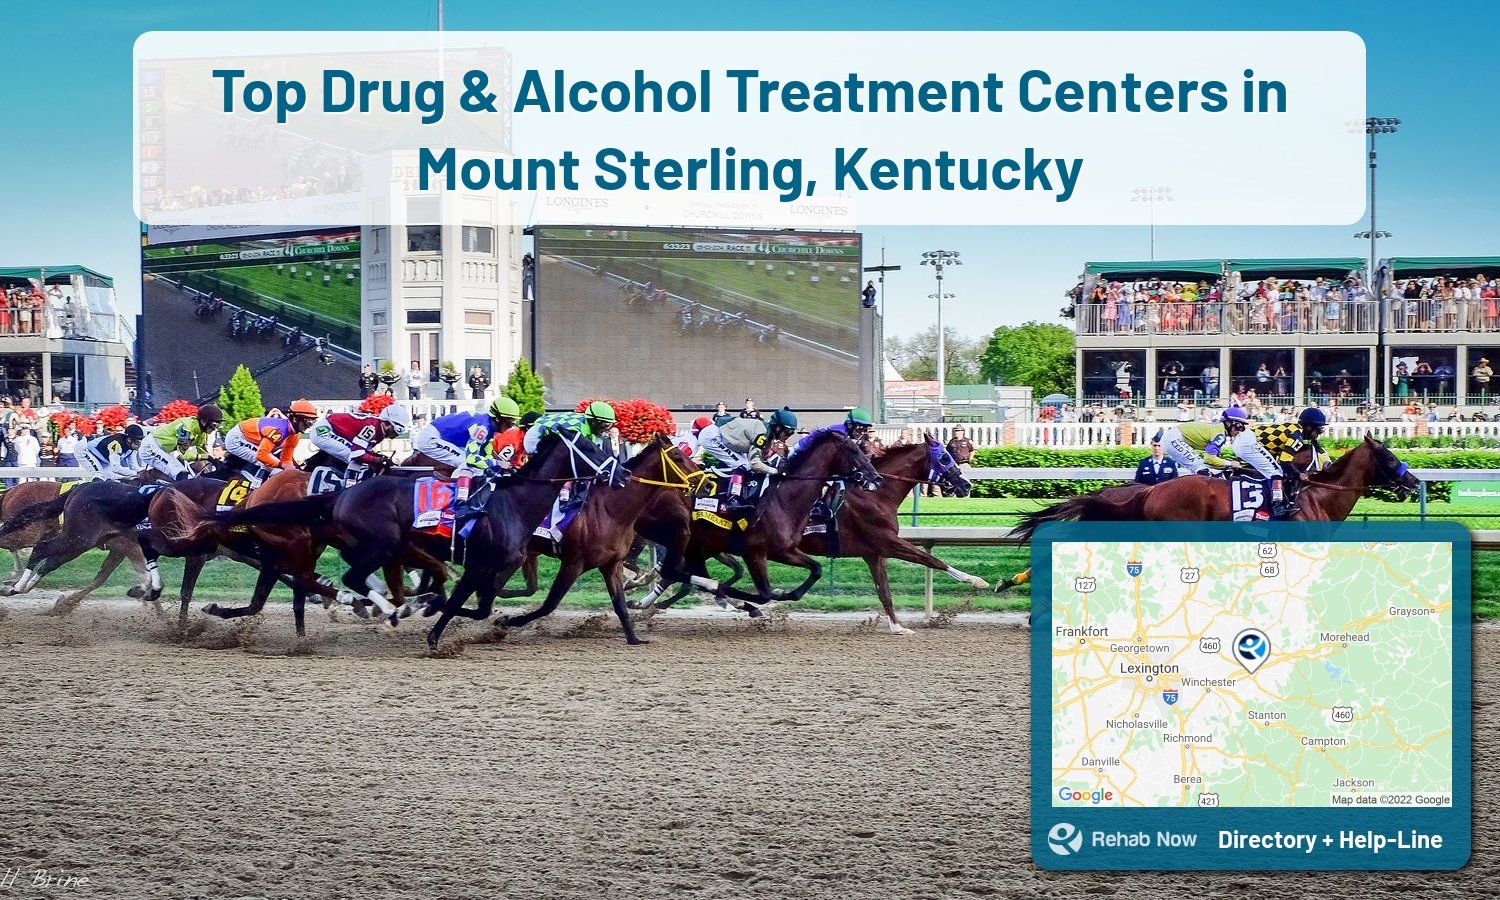 Ready to pick a rehab center in Mount Sterling? Get off alcohol, opiates, and other drugs, by selecting top drug rehab centers in Kentucky